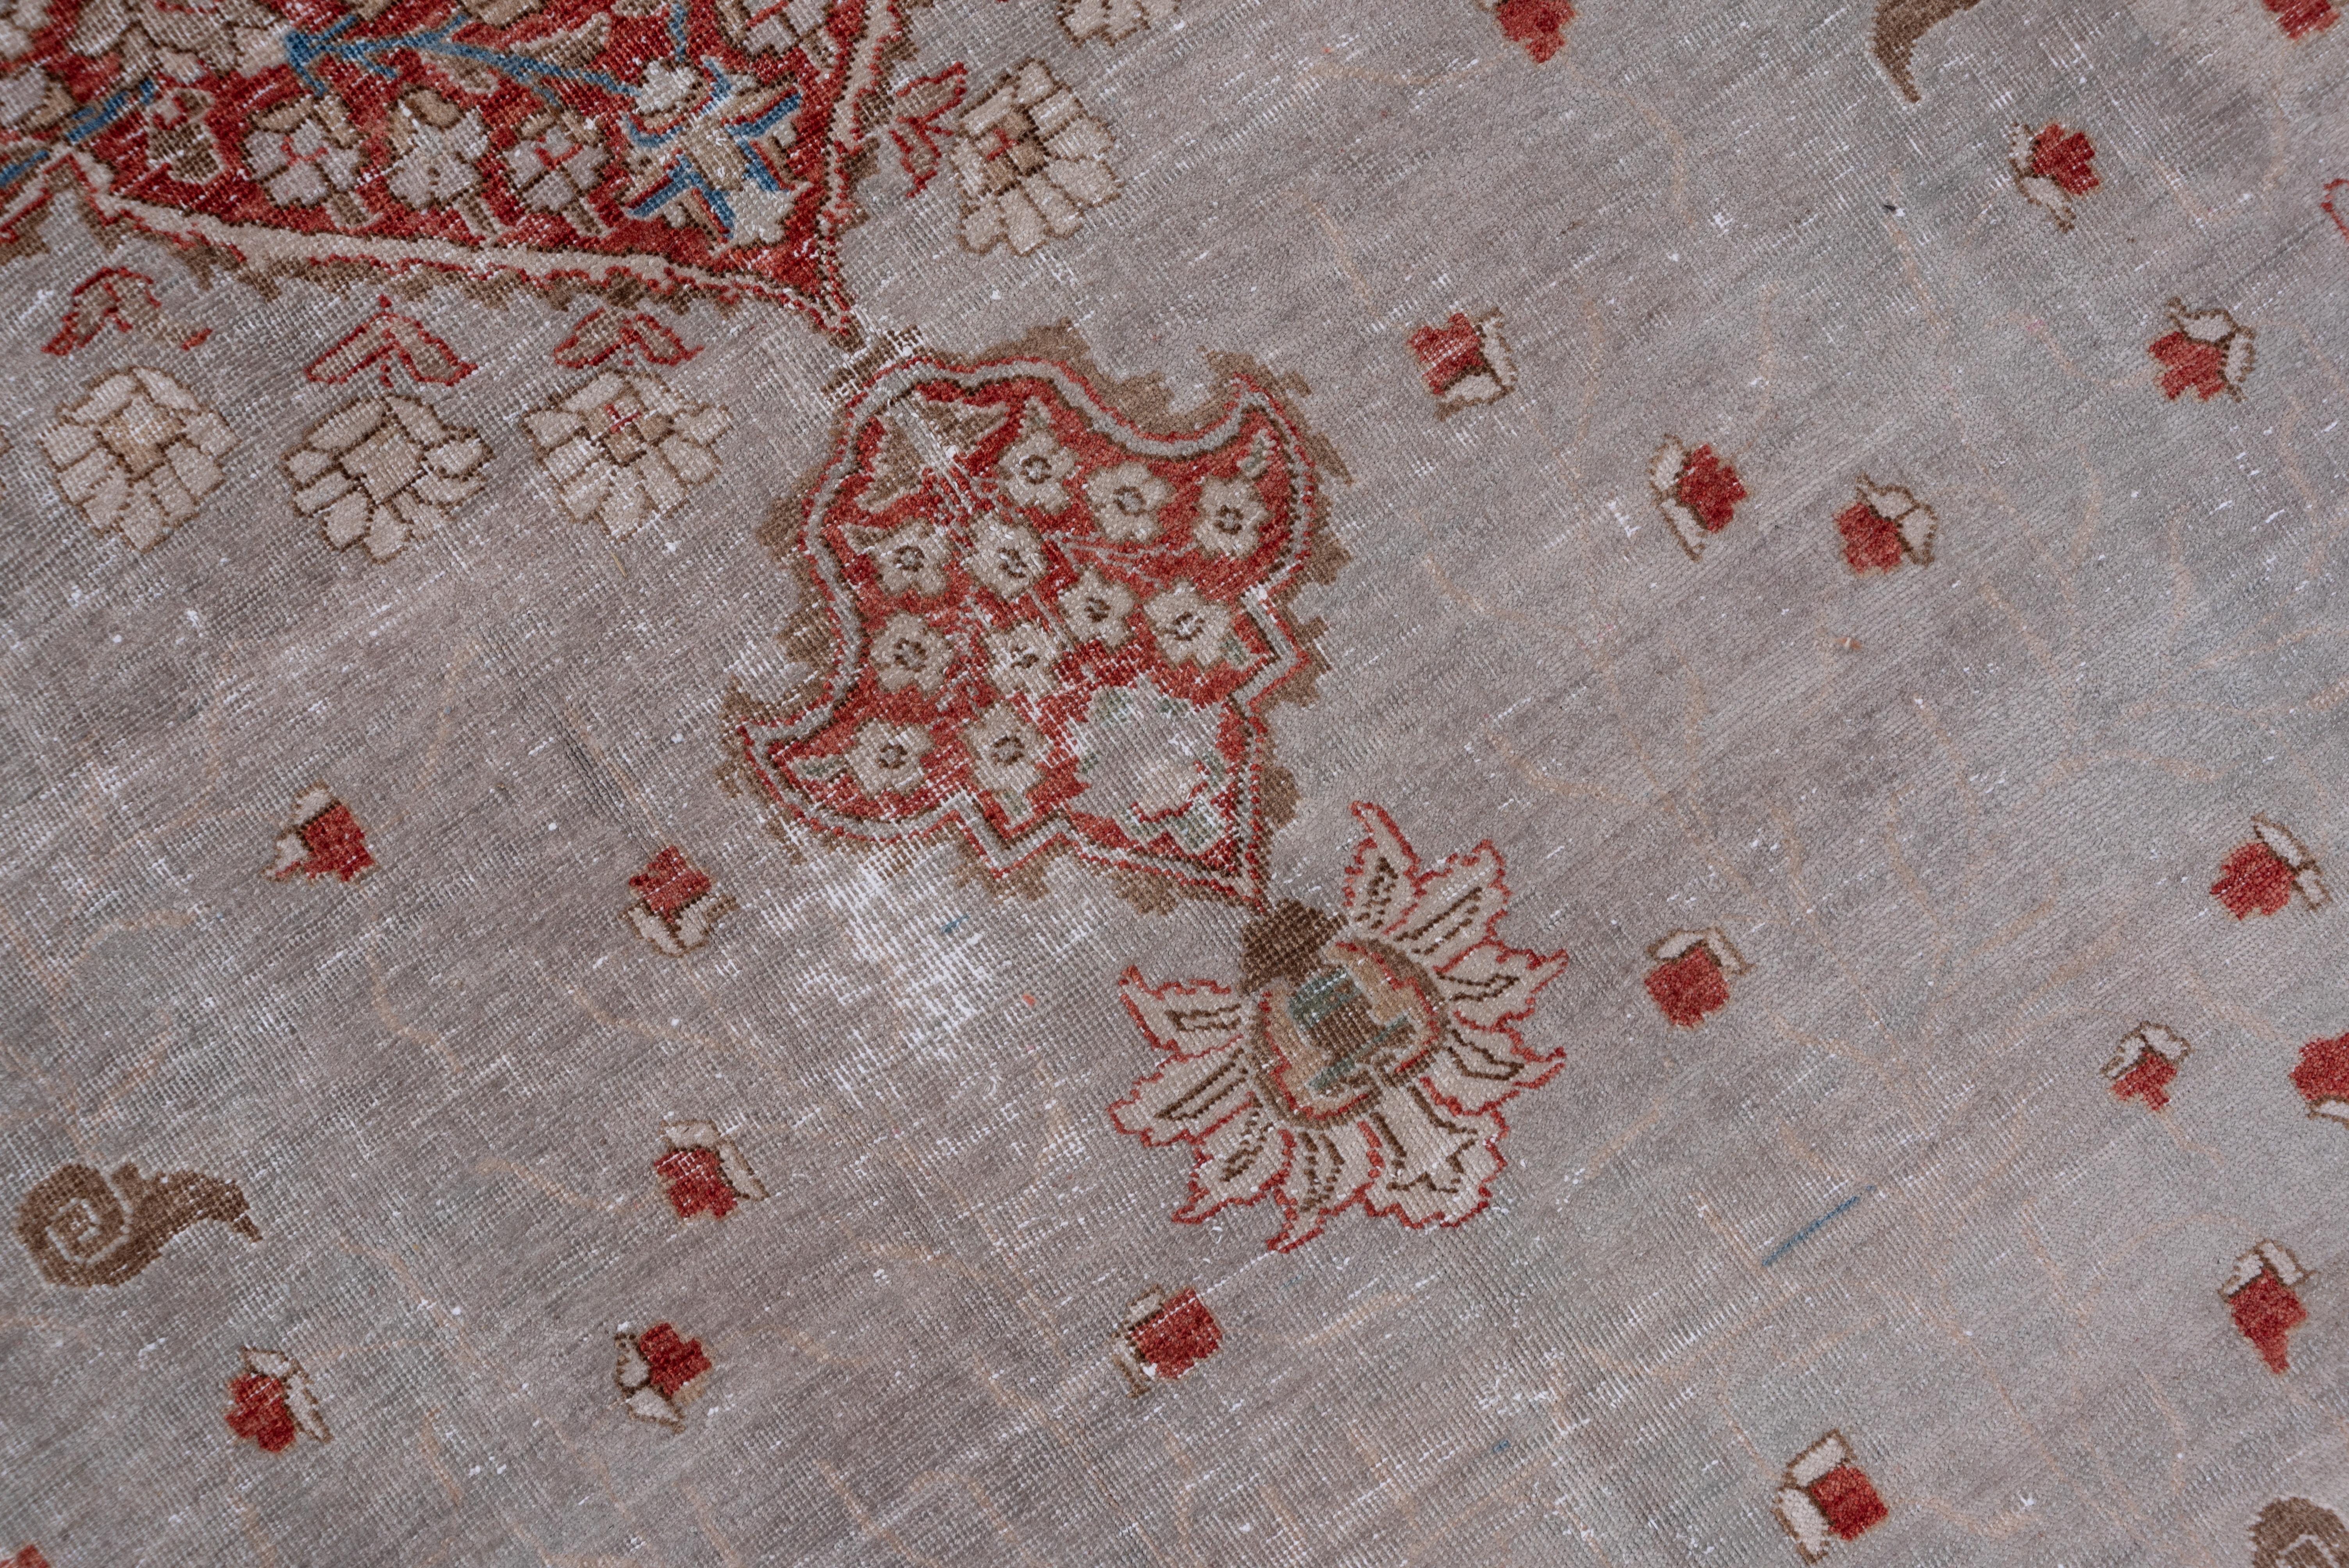 Eliko Rug by David Ariel Persian Tabriz Rug, Grey Subfield and Red Borders In Good Condition For Sale In New York, NY